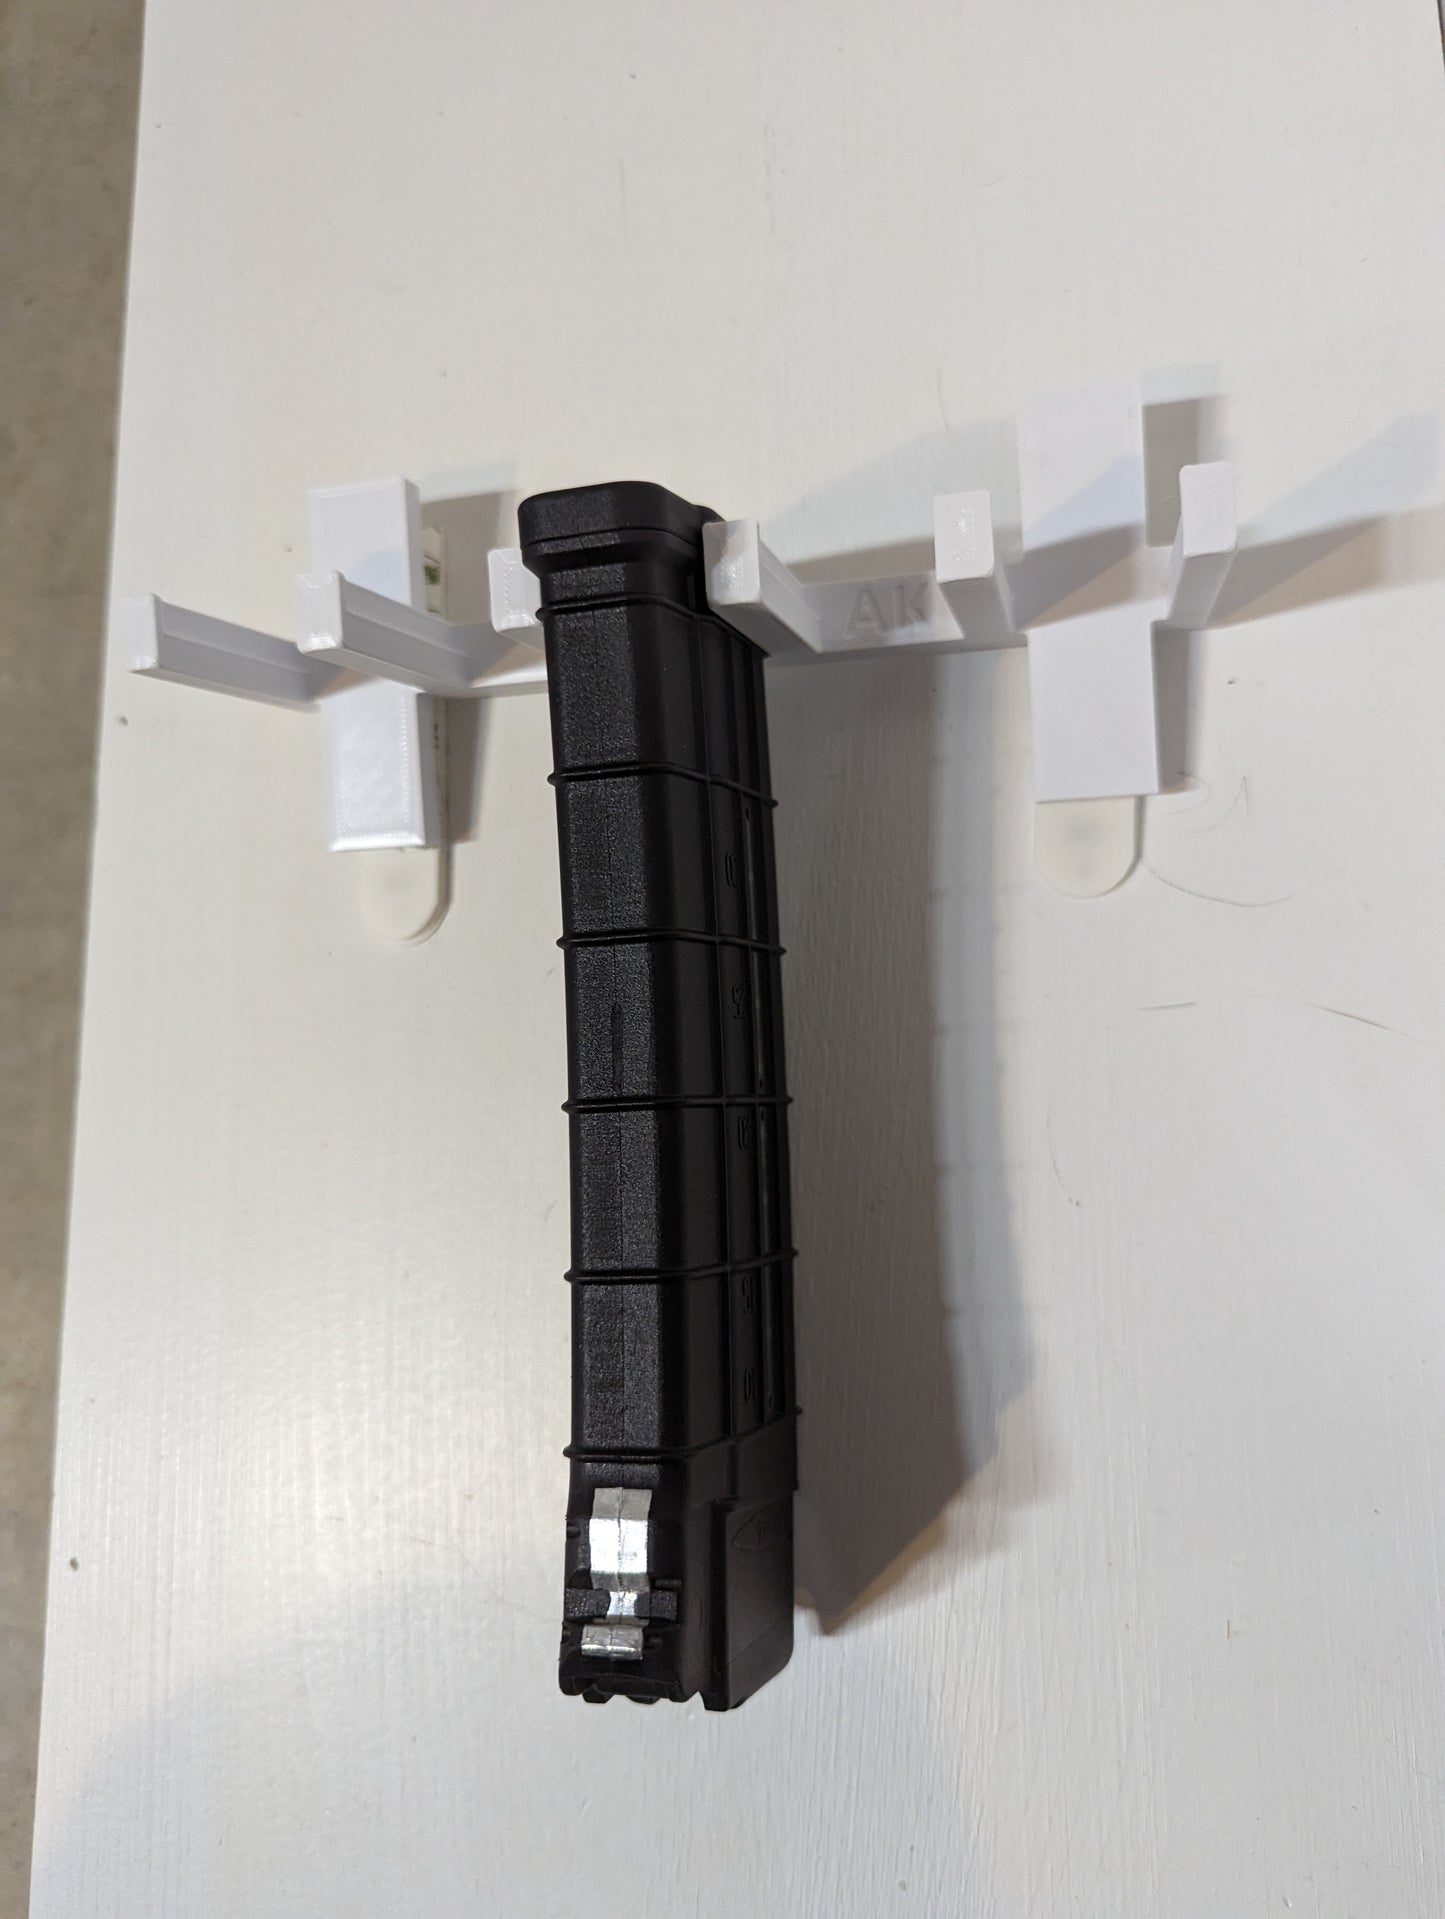 Mount for 556 AK PSA Mags - Command Strips | Magazine Holder Storage Rack